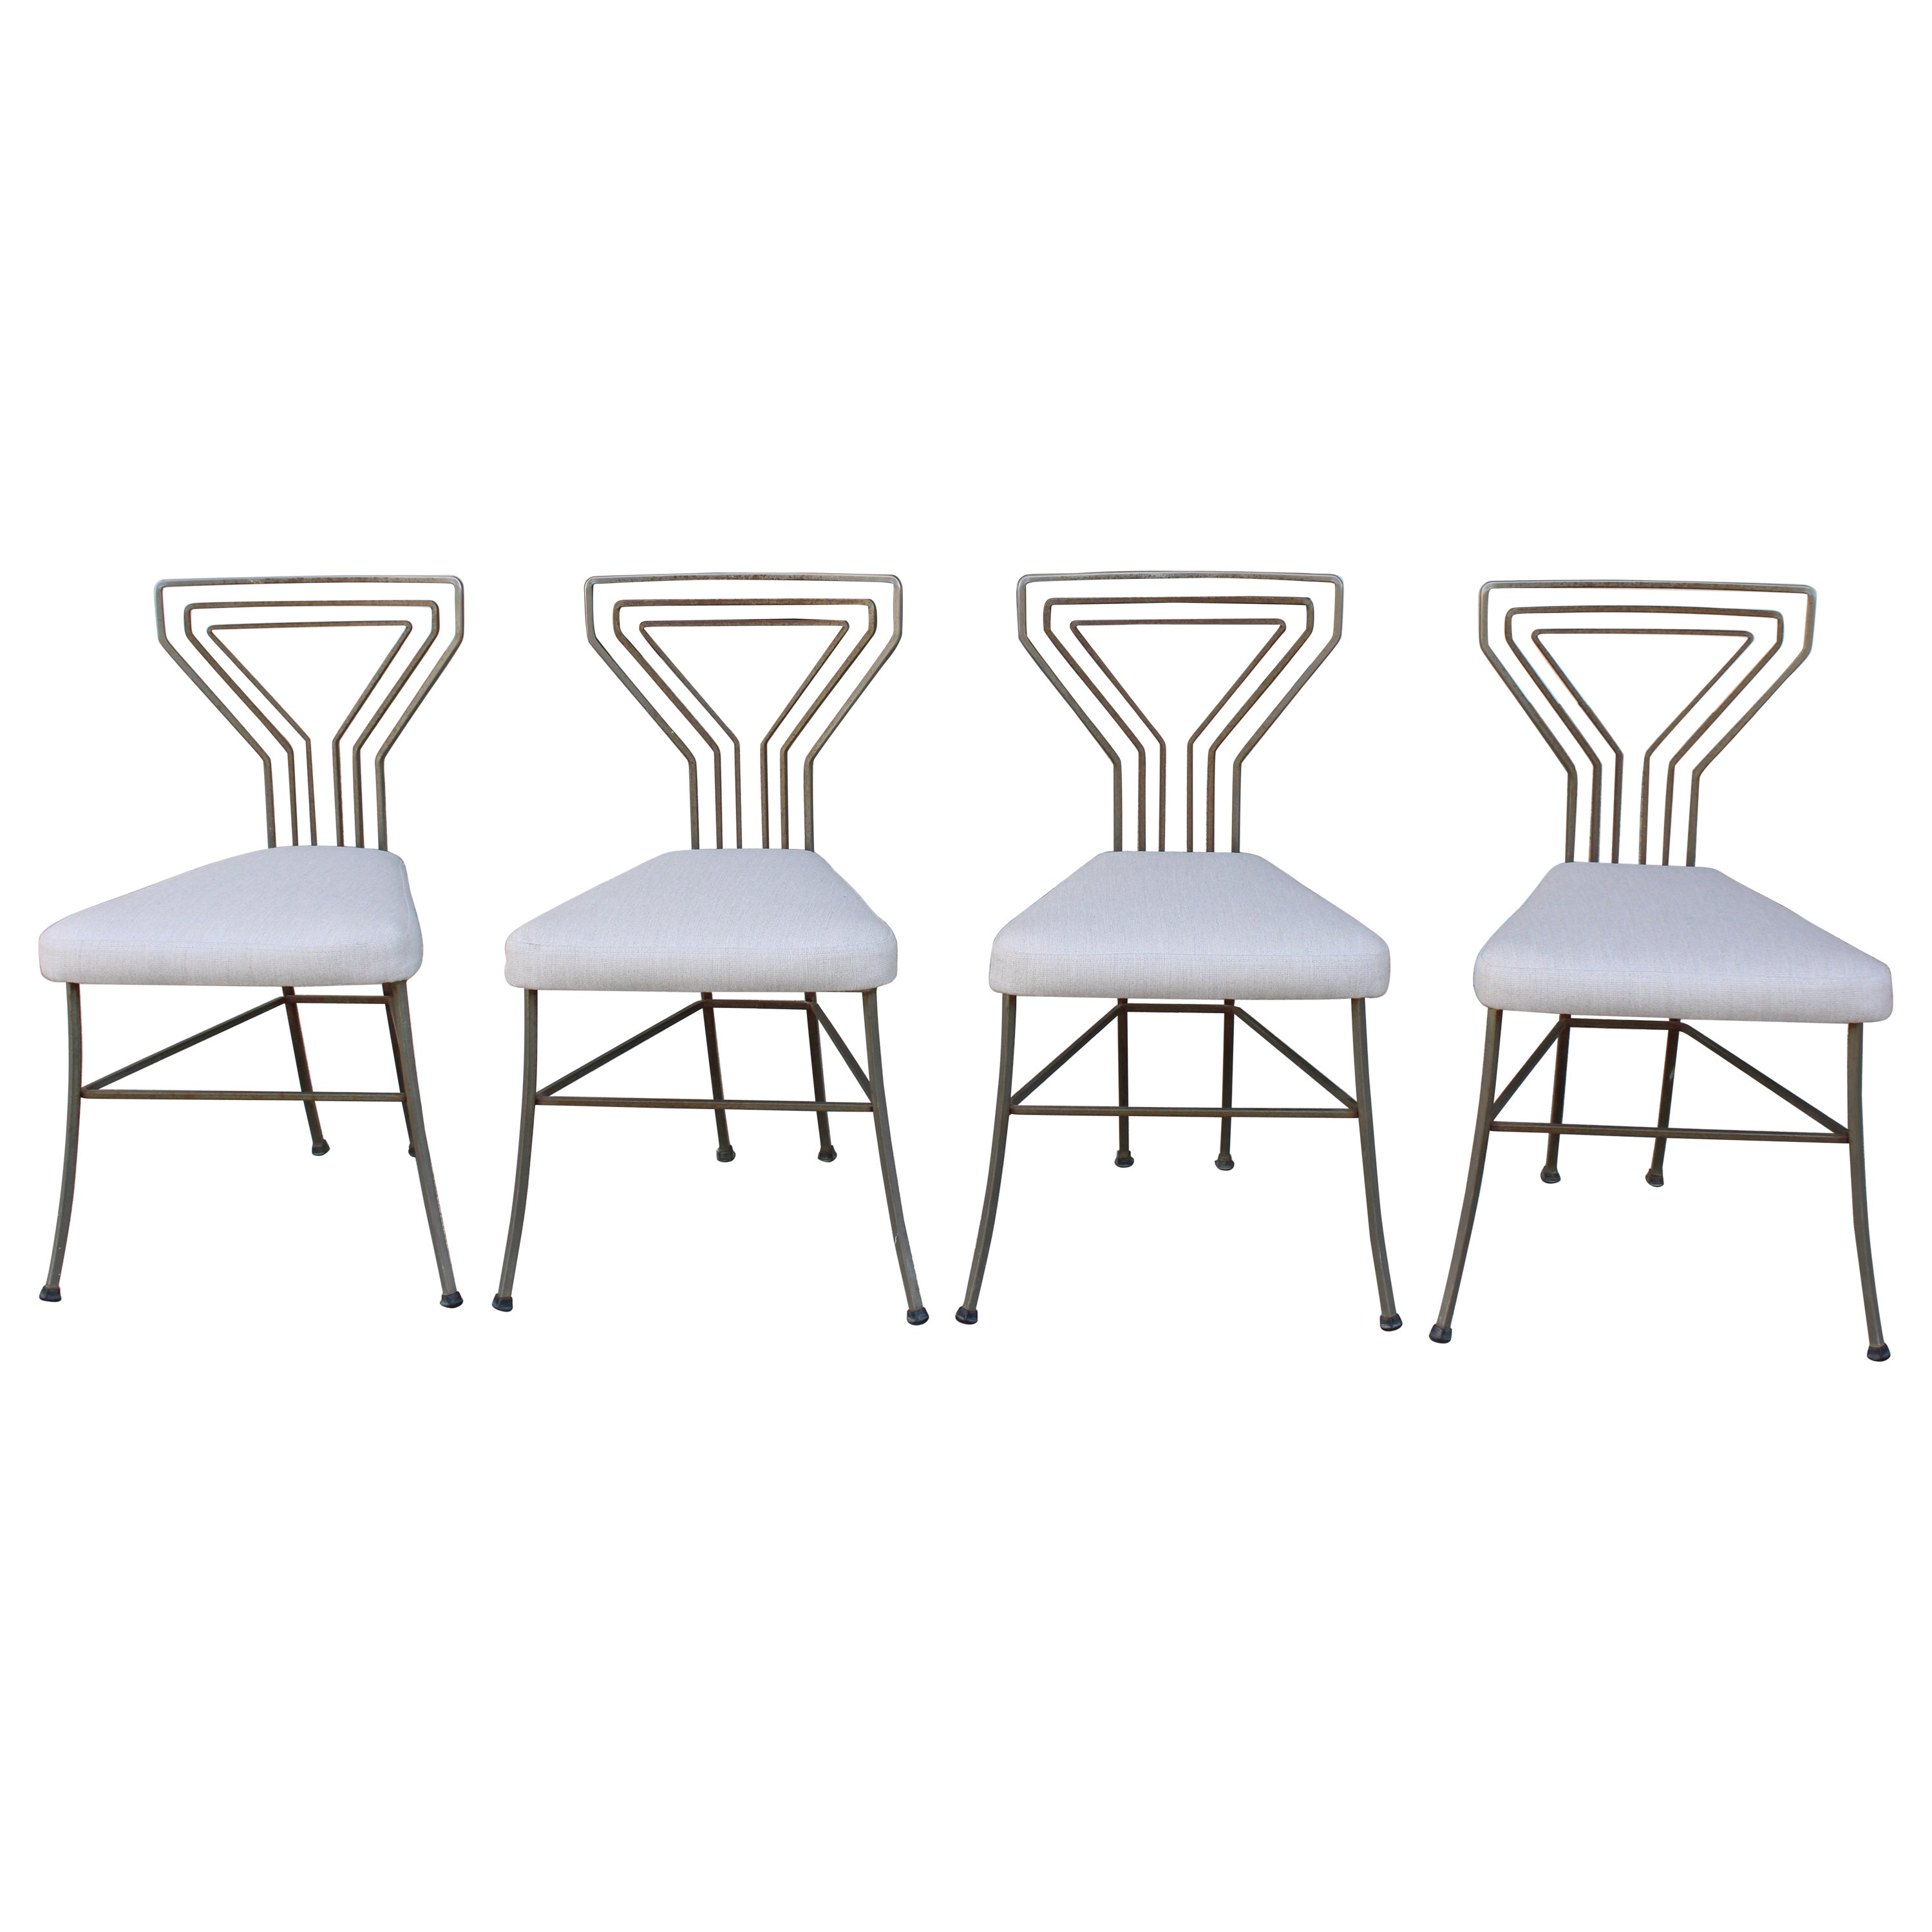 Four Mid Century Patio Chairs For Sale